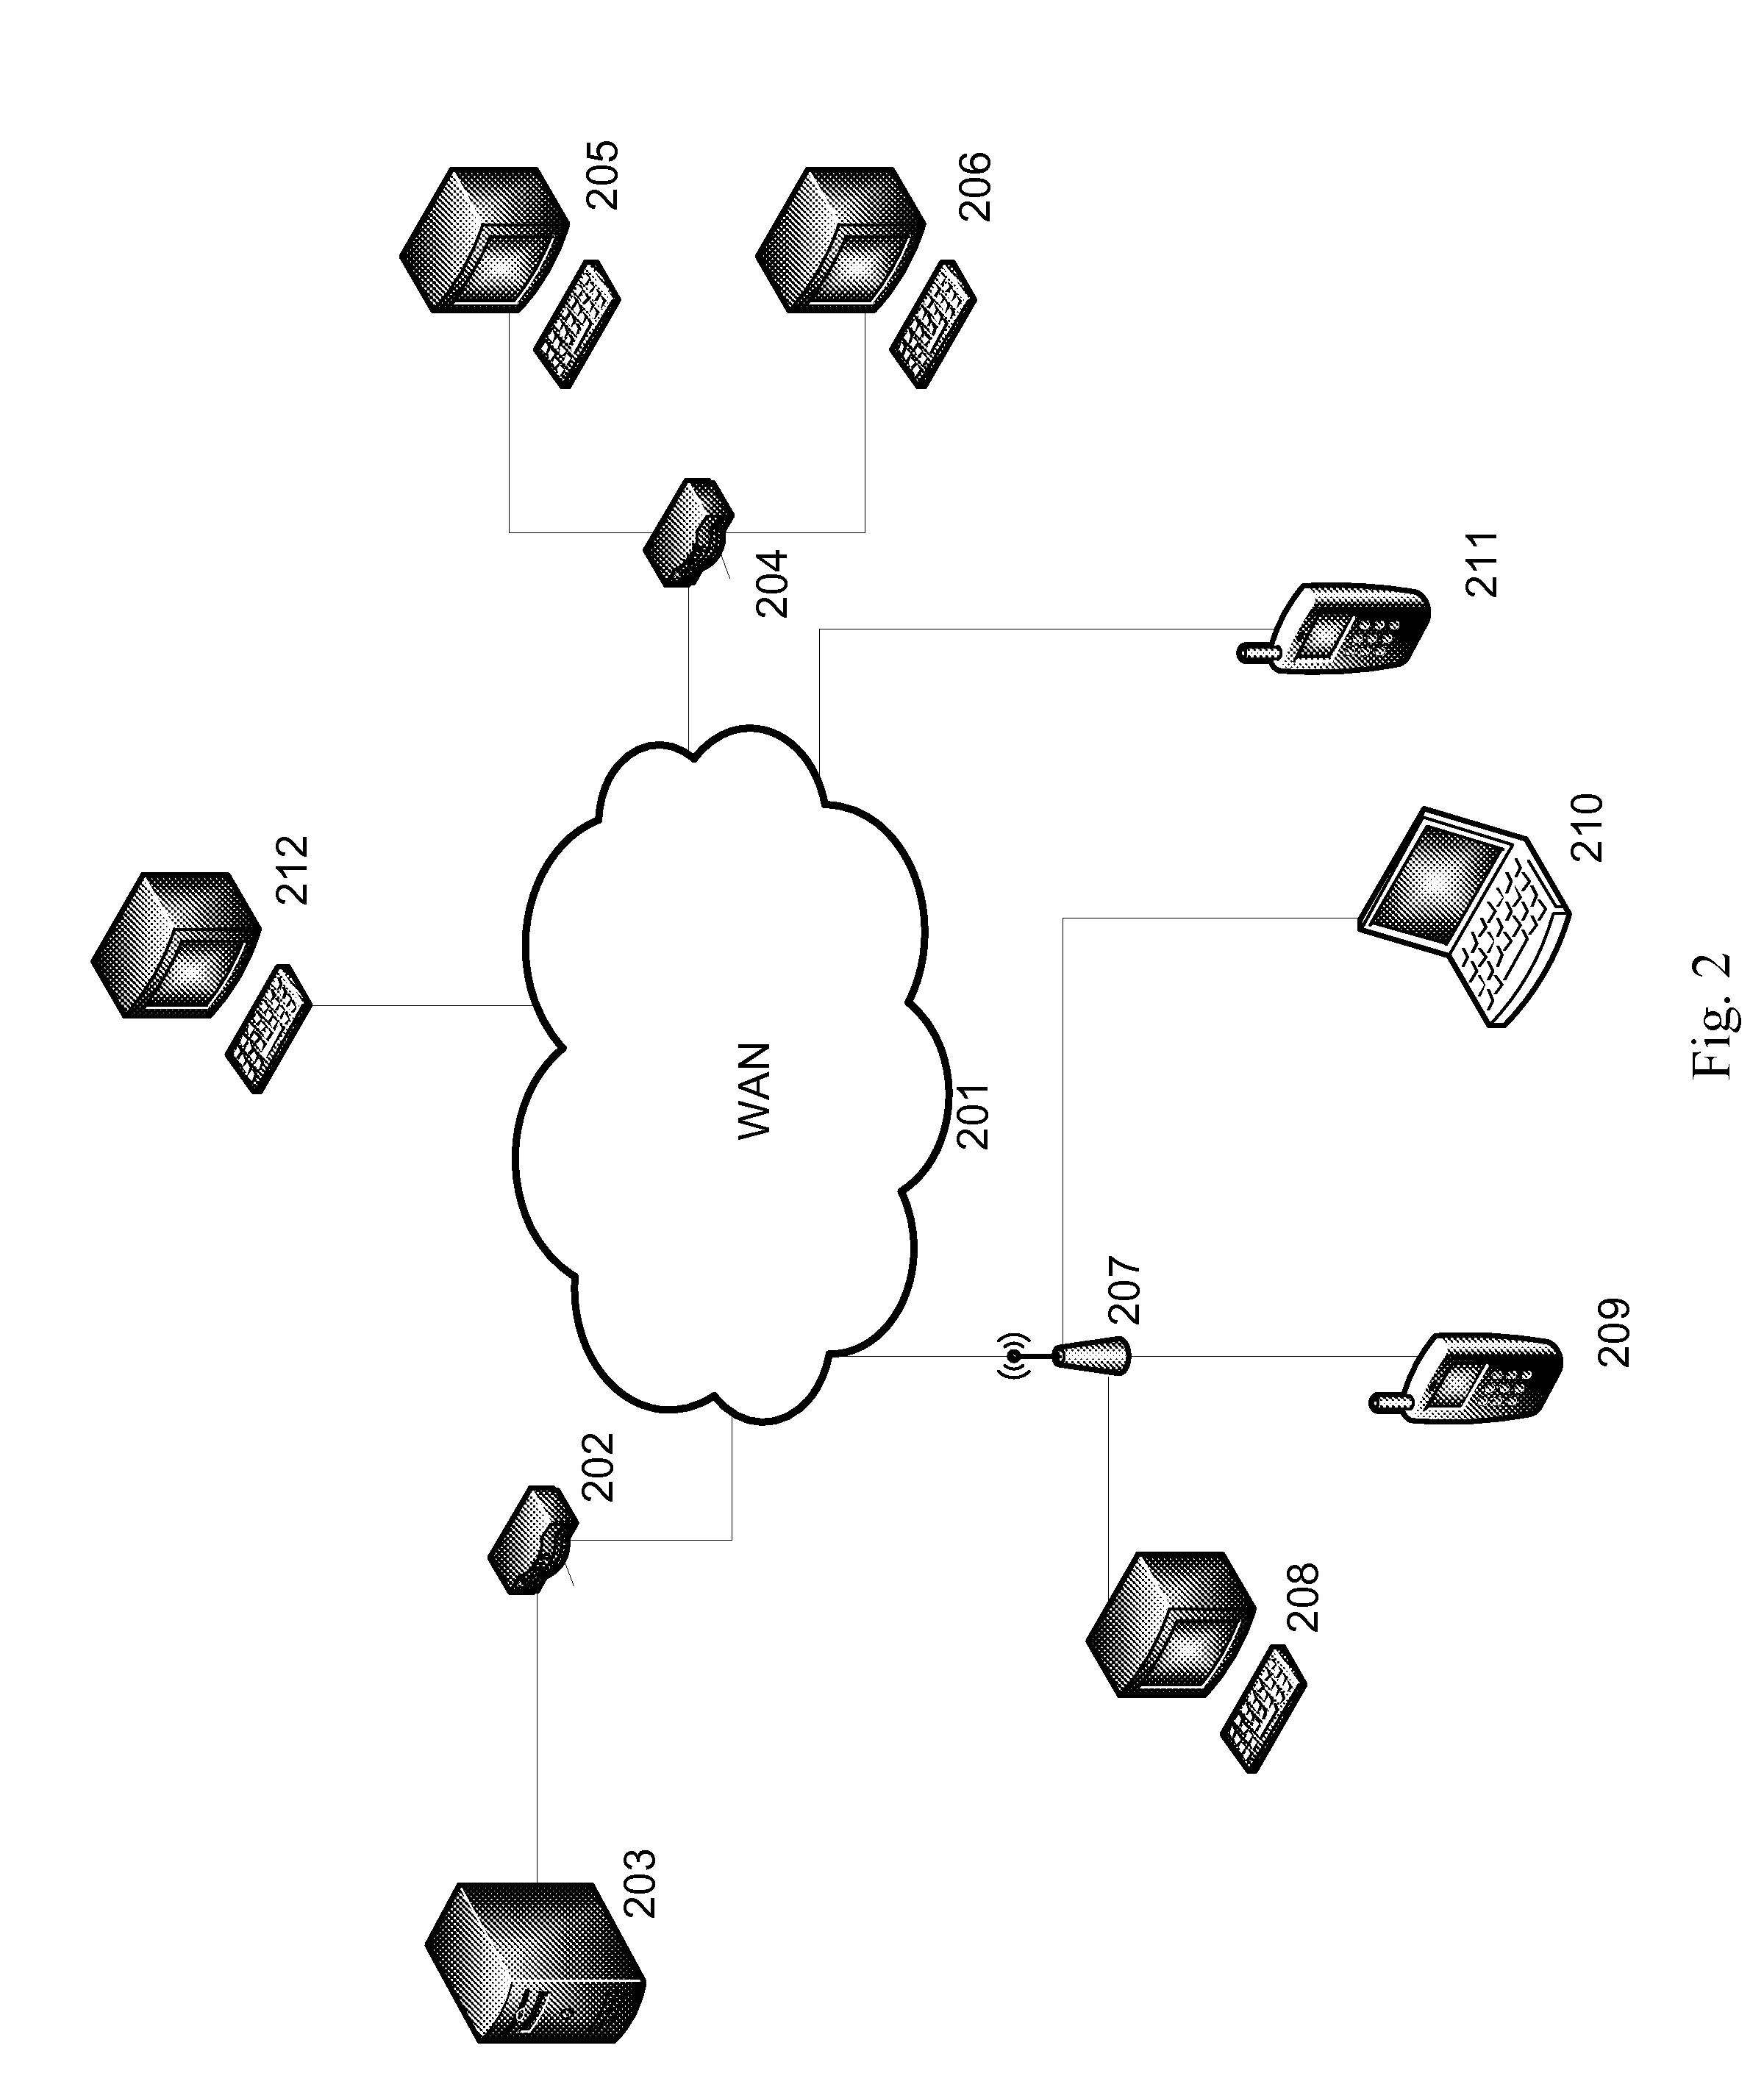 System and method for providing bidding and execution of fractional ownership assets